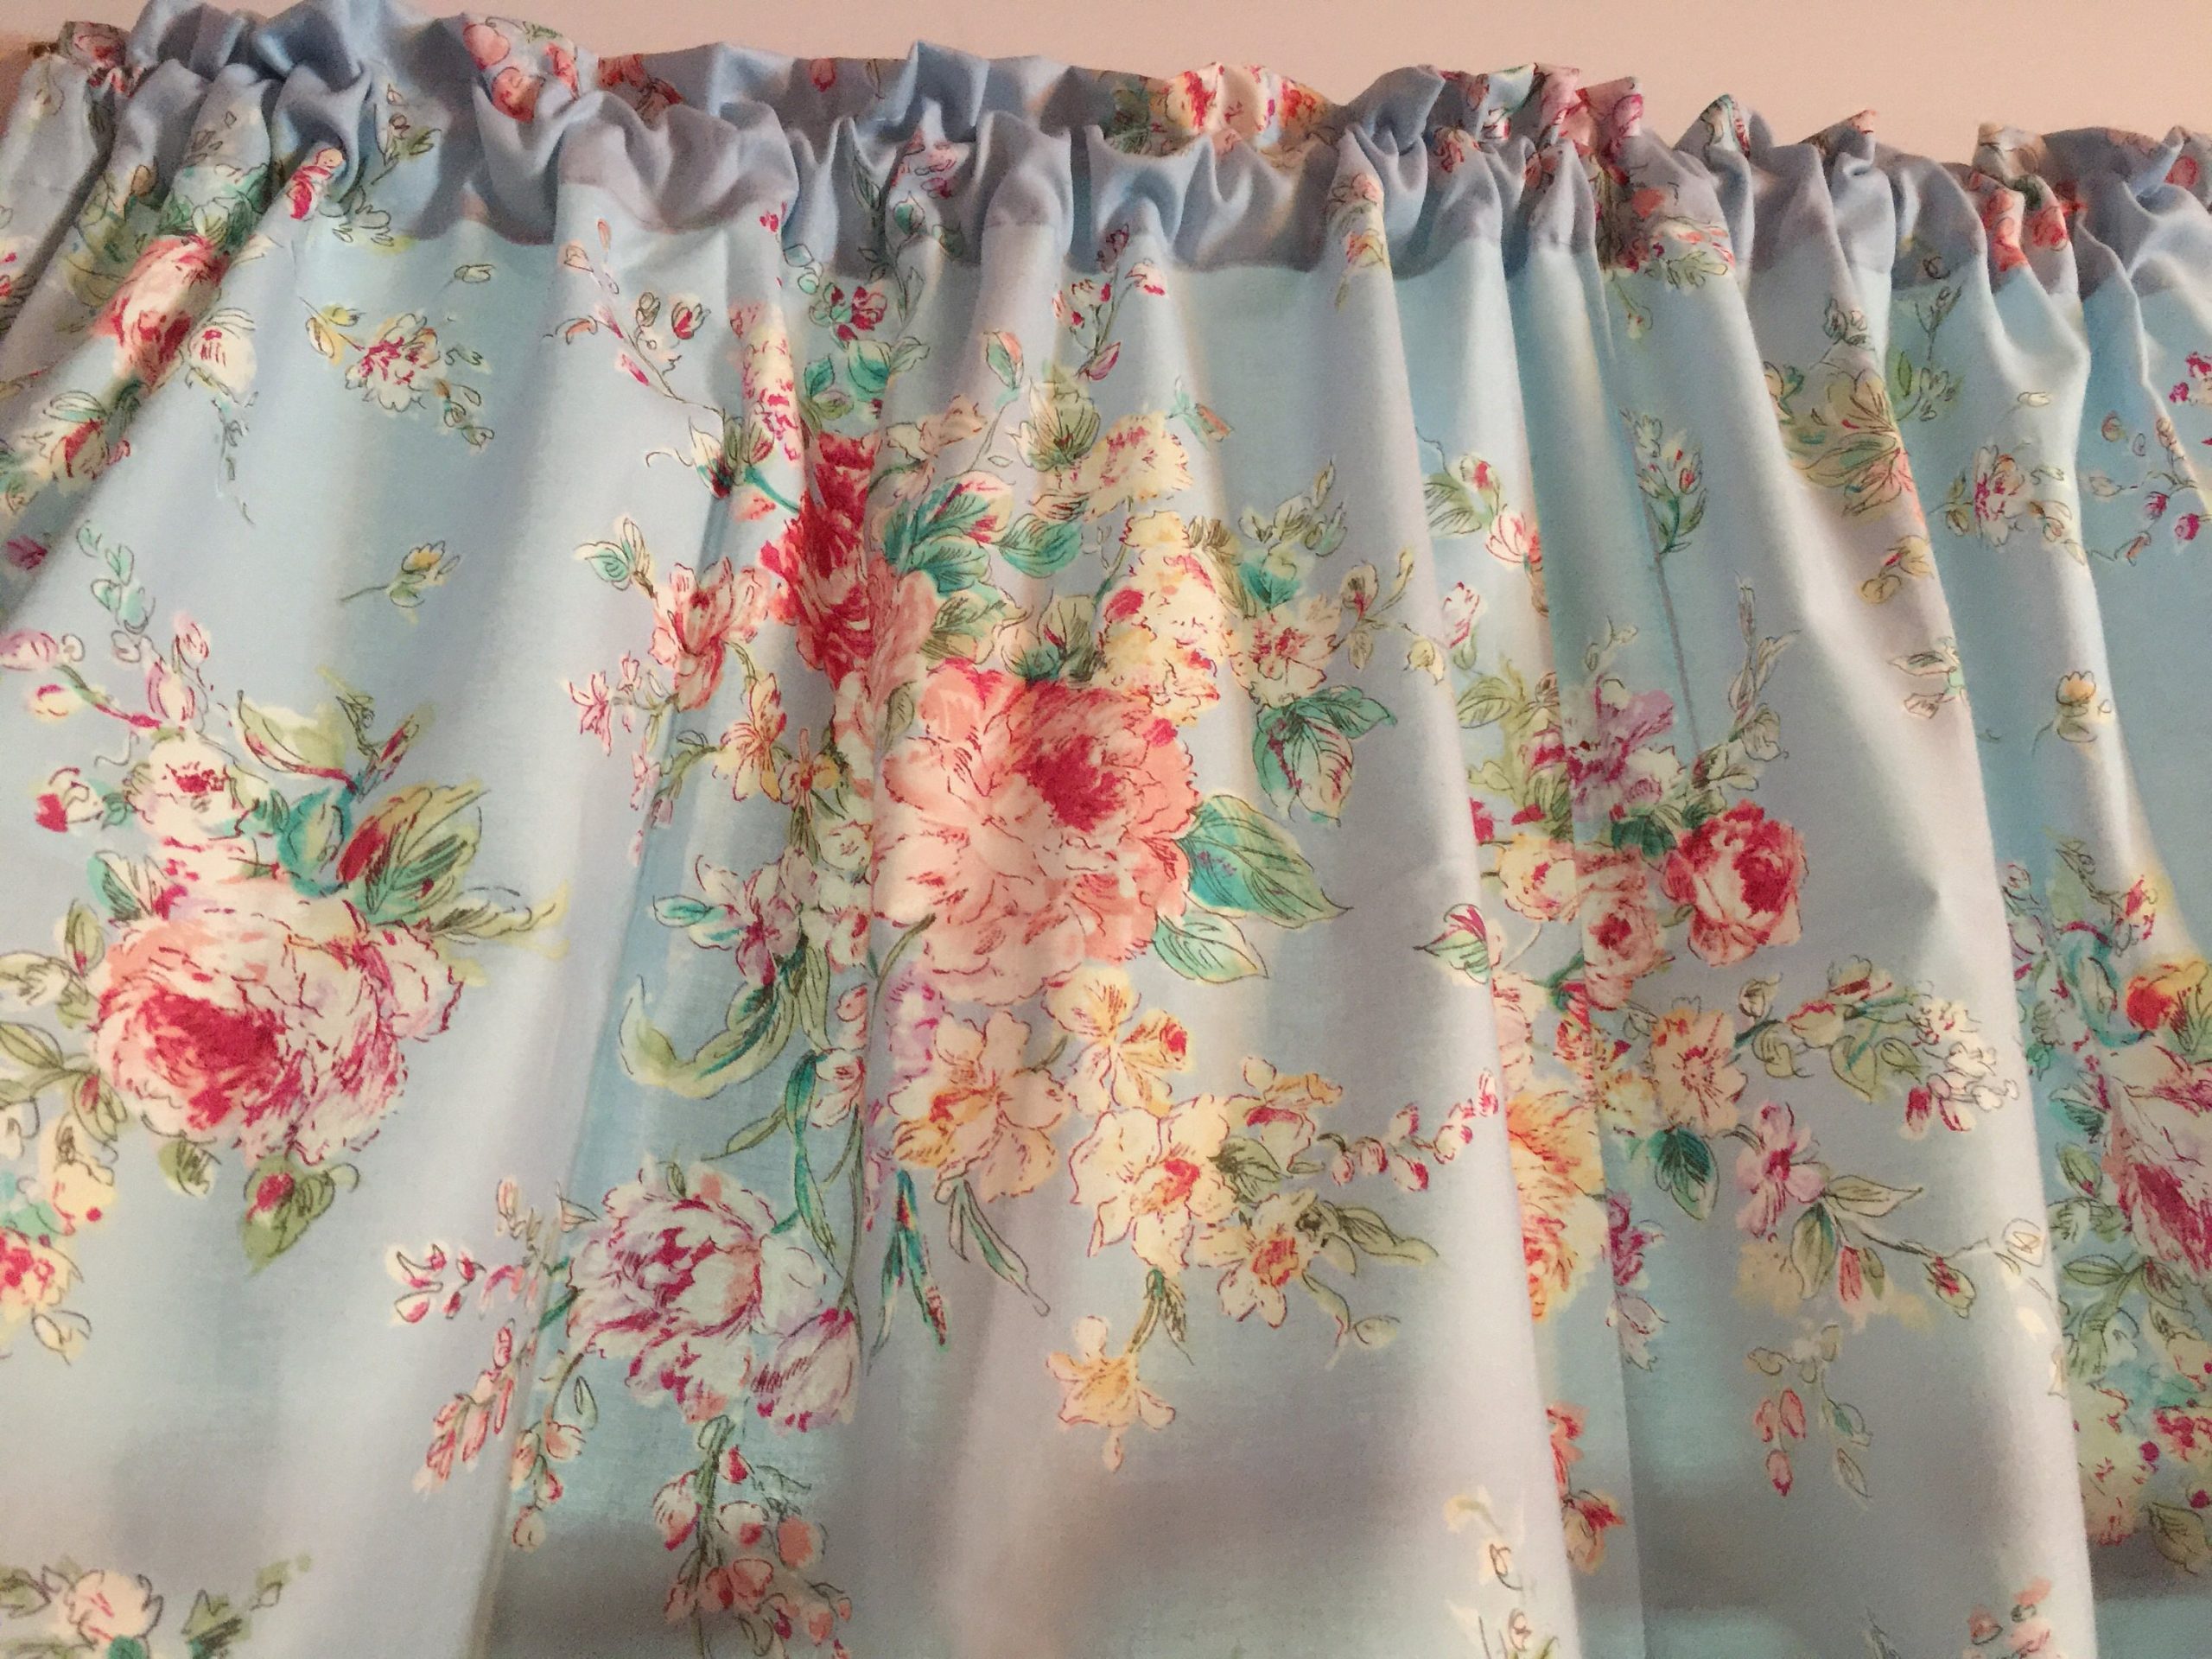 Powder Blue Shabby Chic Floral New Cotton Window Curtain avec Shabby Chic Curtains